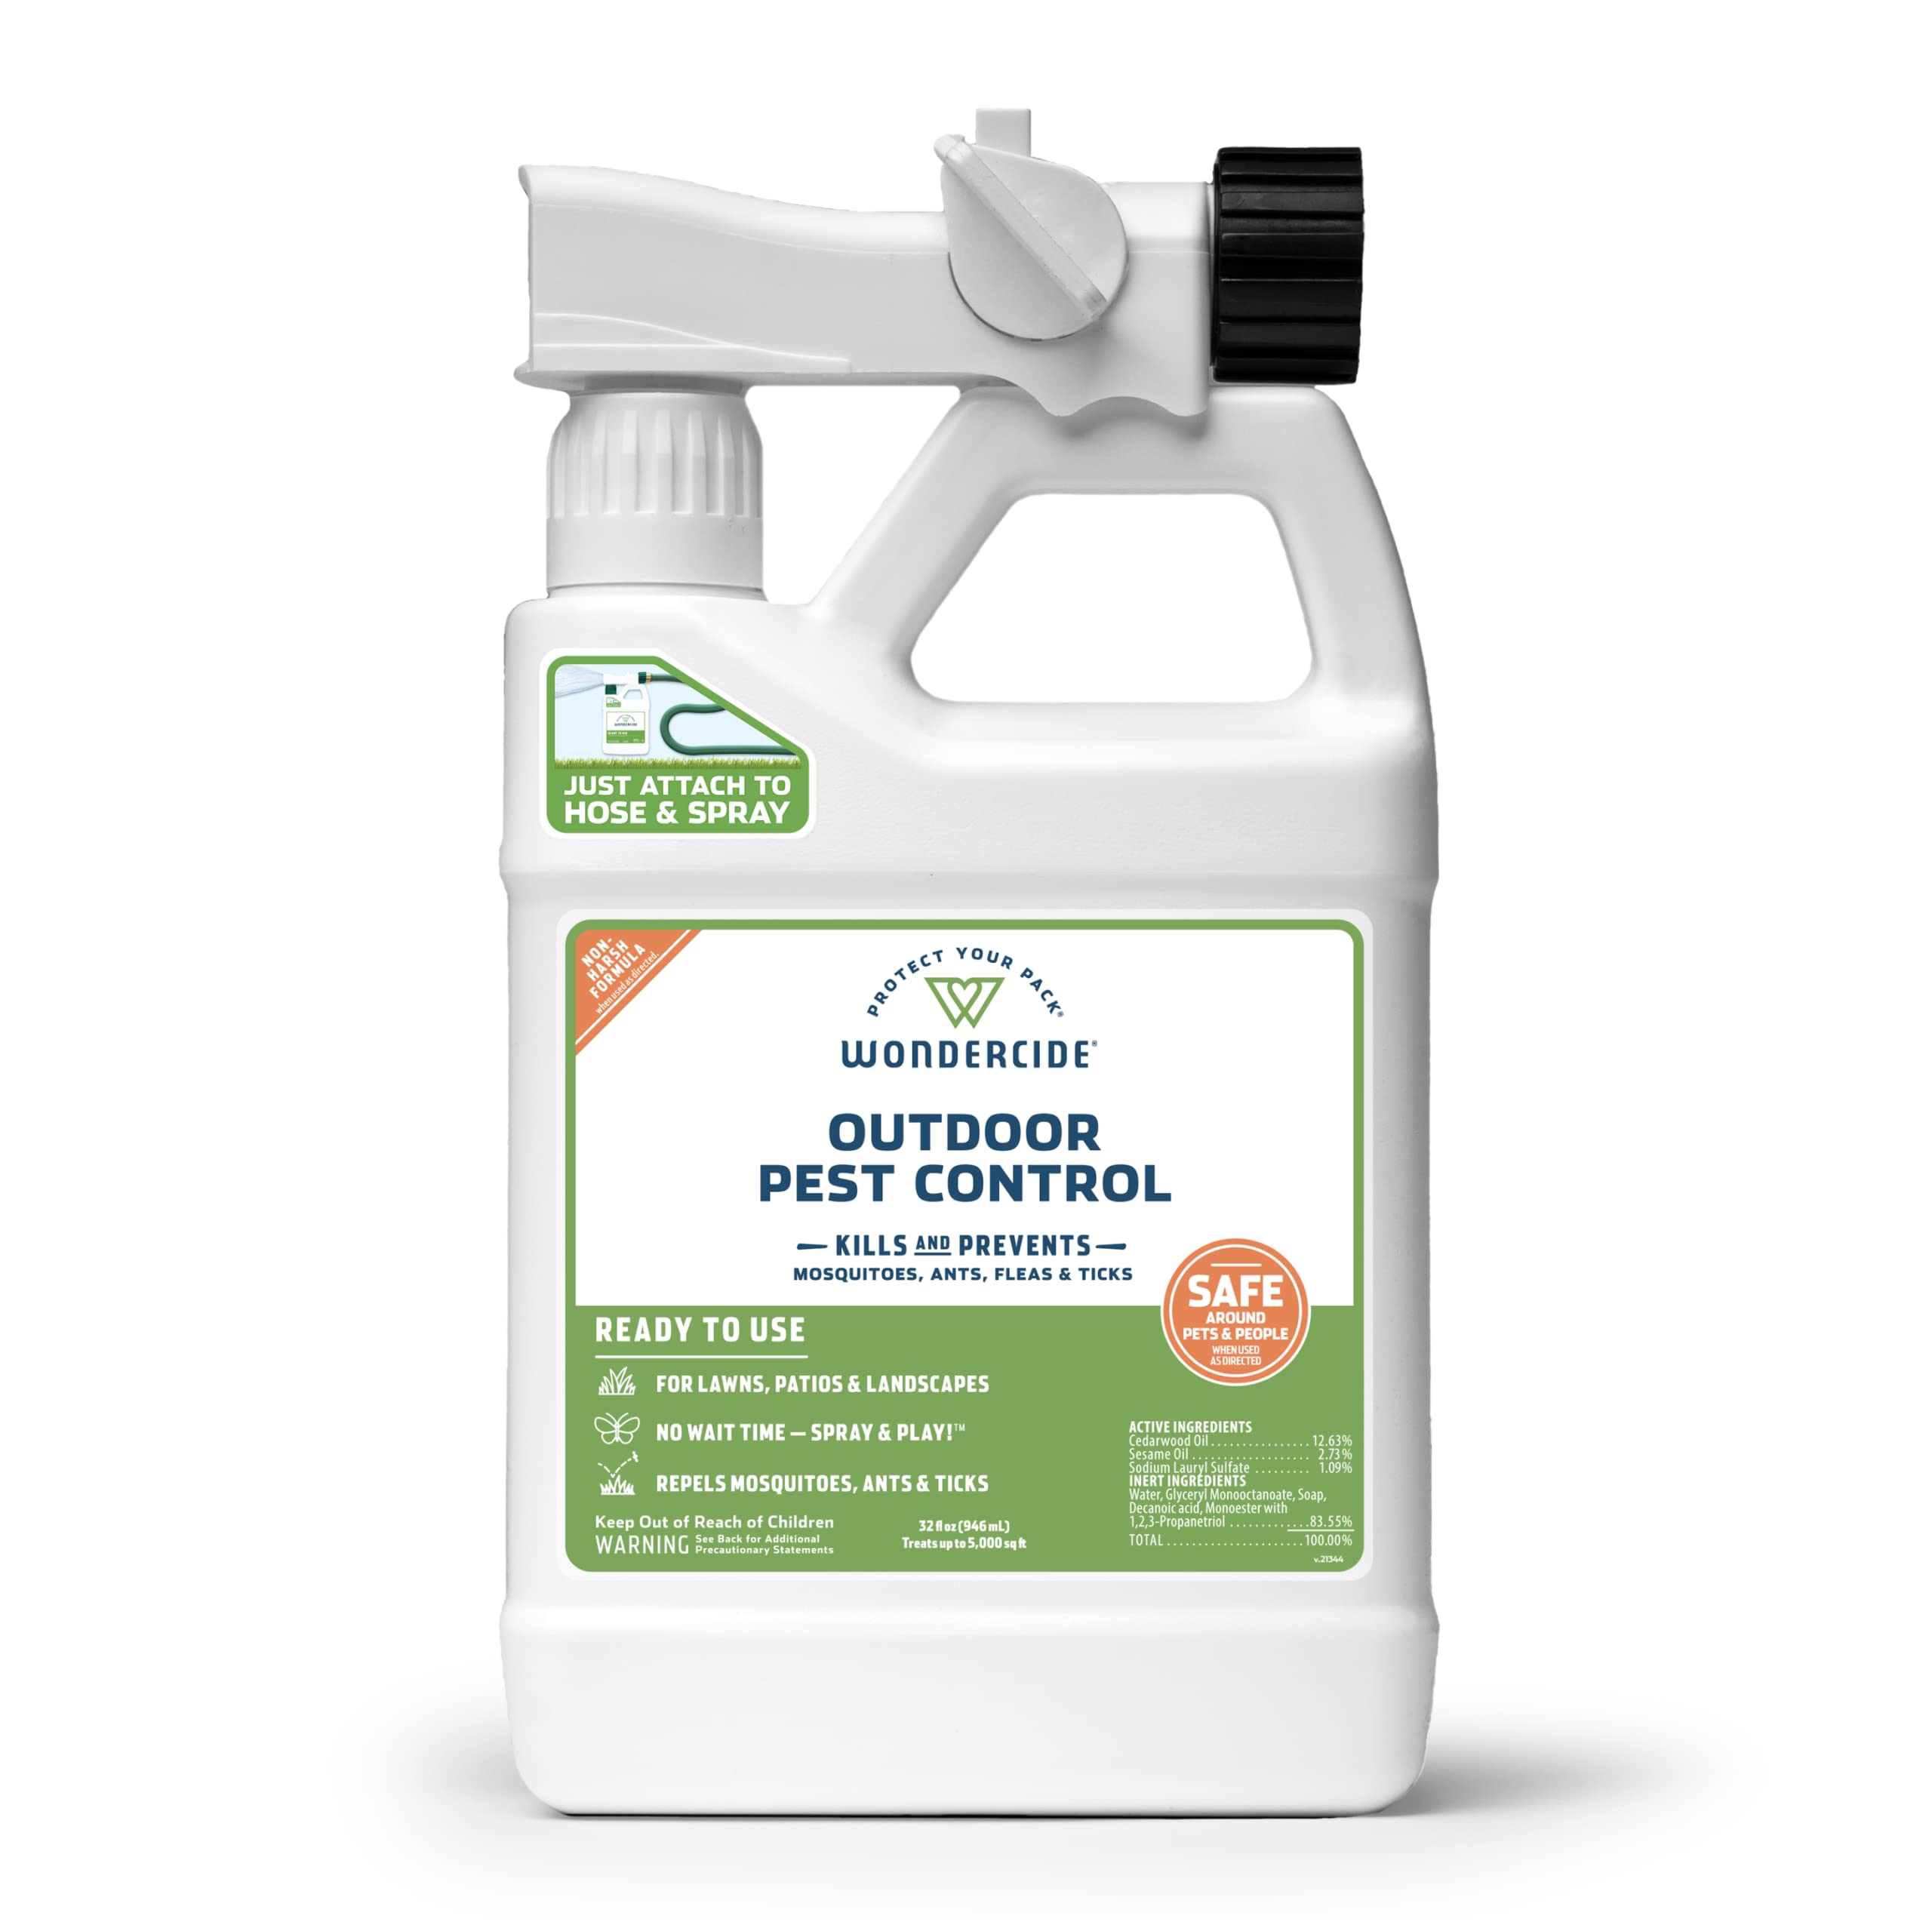 Wondercide - EcoTreat Ready-to-Use Outdoor Pest Control Spray with Natural Essential Oils - Mosquito, Ant, Insect Repellent, Treatment, and Killer - Plant-Based - Safe for Pets, Kids - 32 oz